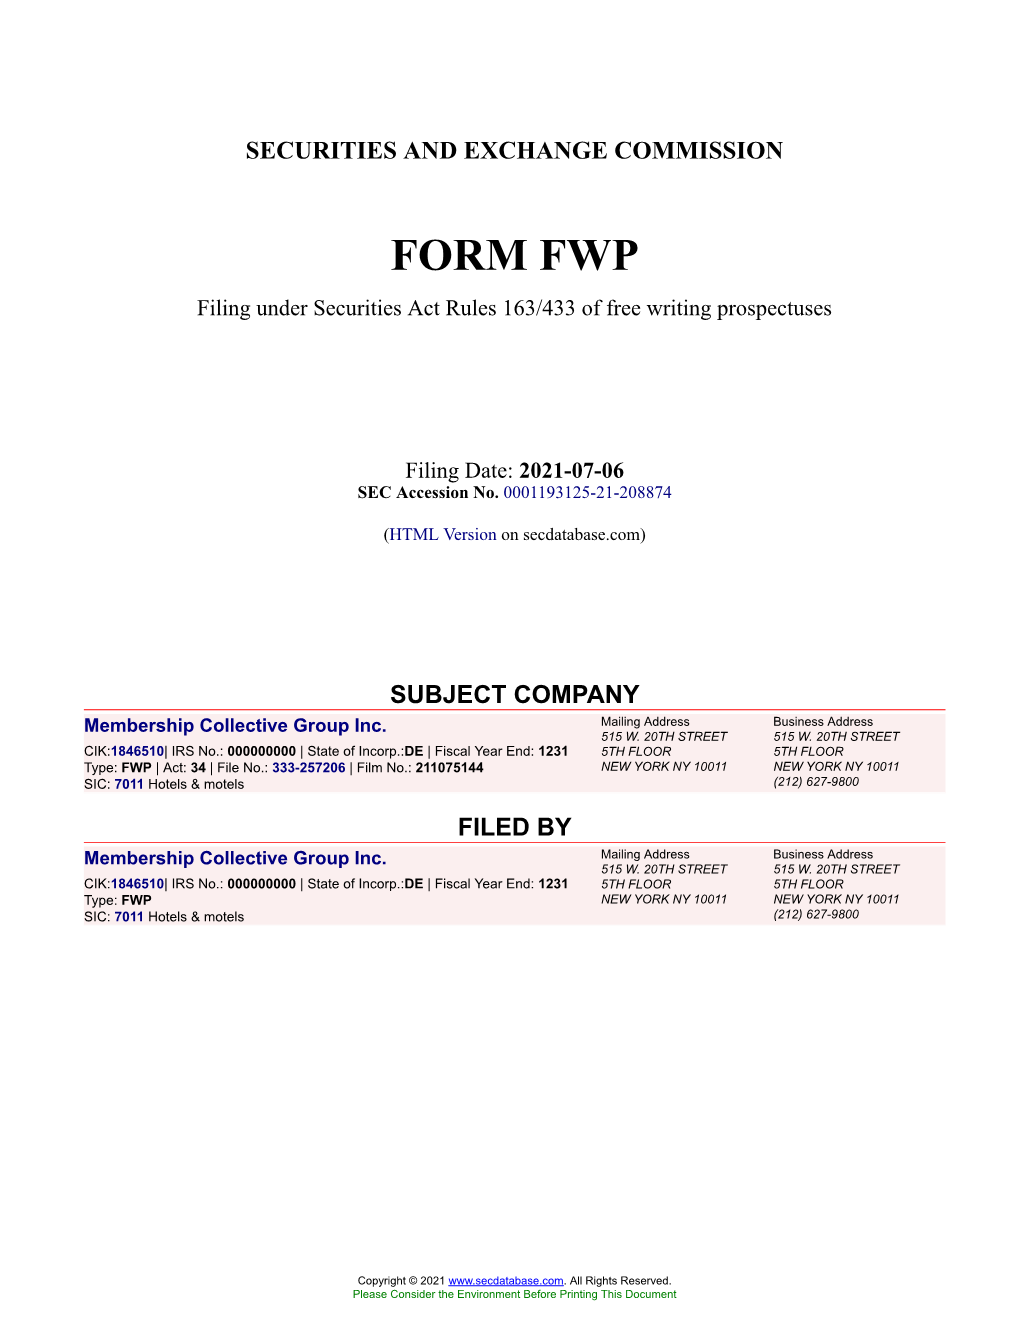 Membership Collective Group Inc. Form FWP Filed 2021-07-06